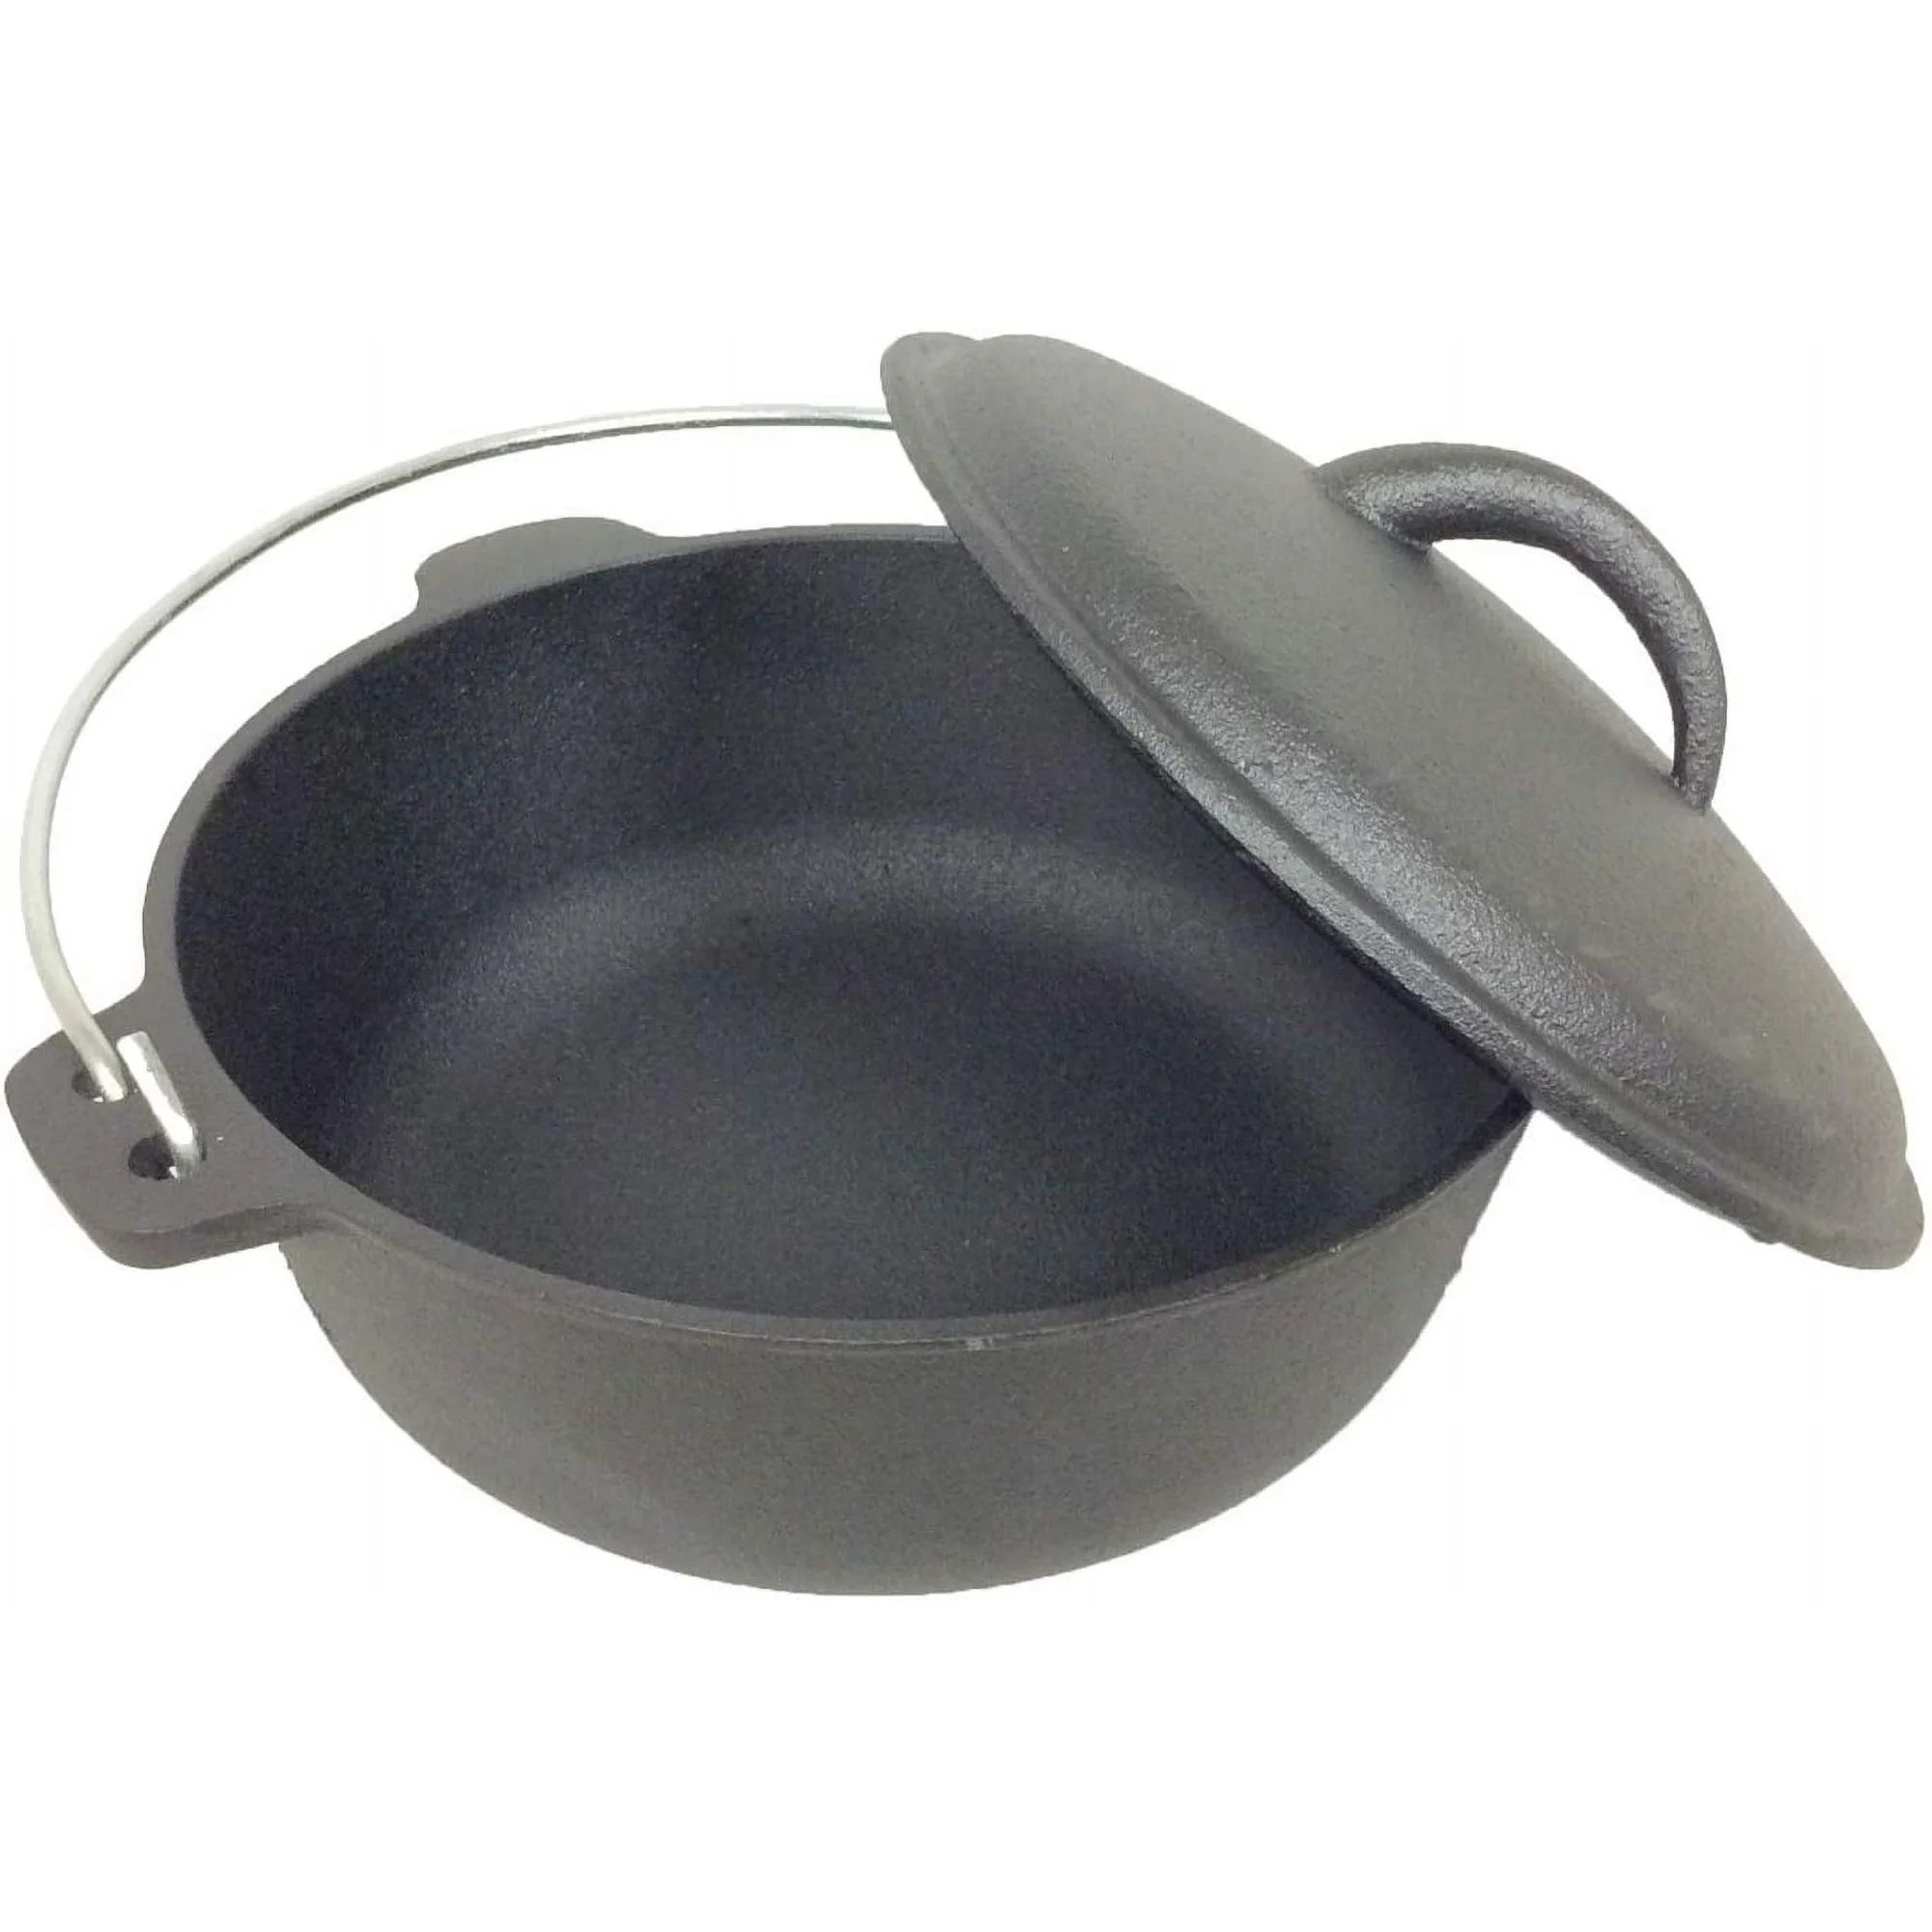 CUISILAND 2QT Cast Iron Dutch Oven with Lifter | Walmart (US)